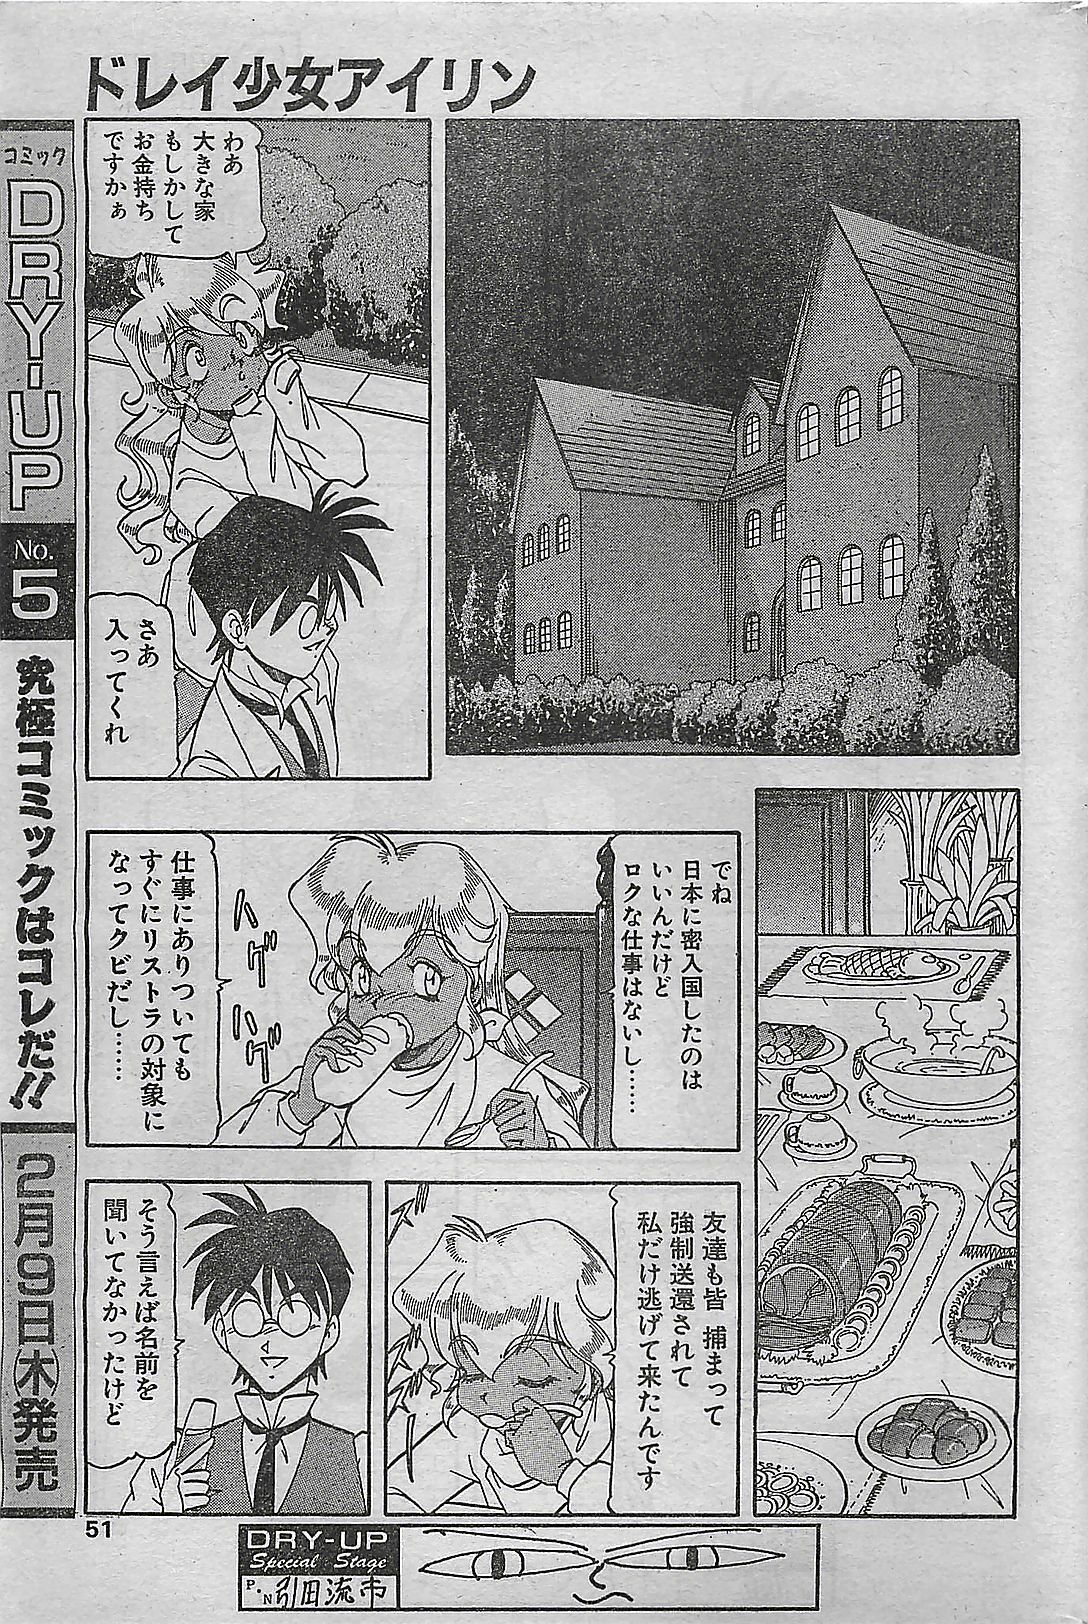 COMIC DRY-UP No.4 1995-02 page 51 full